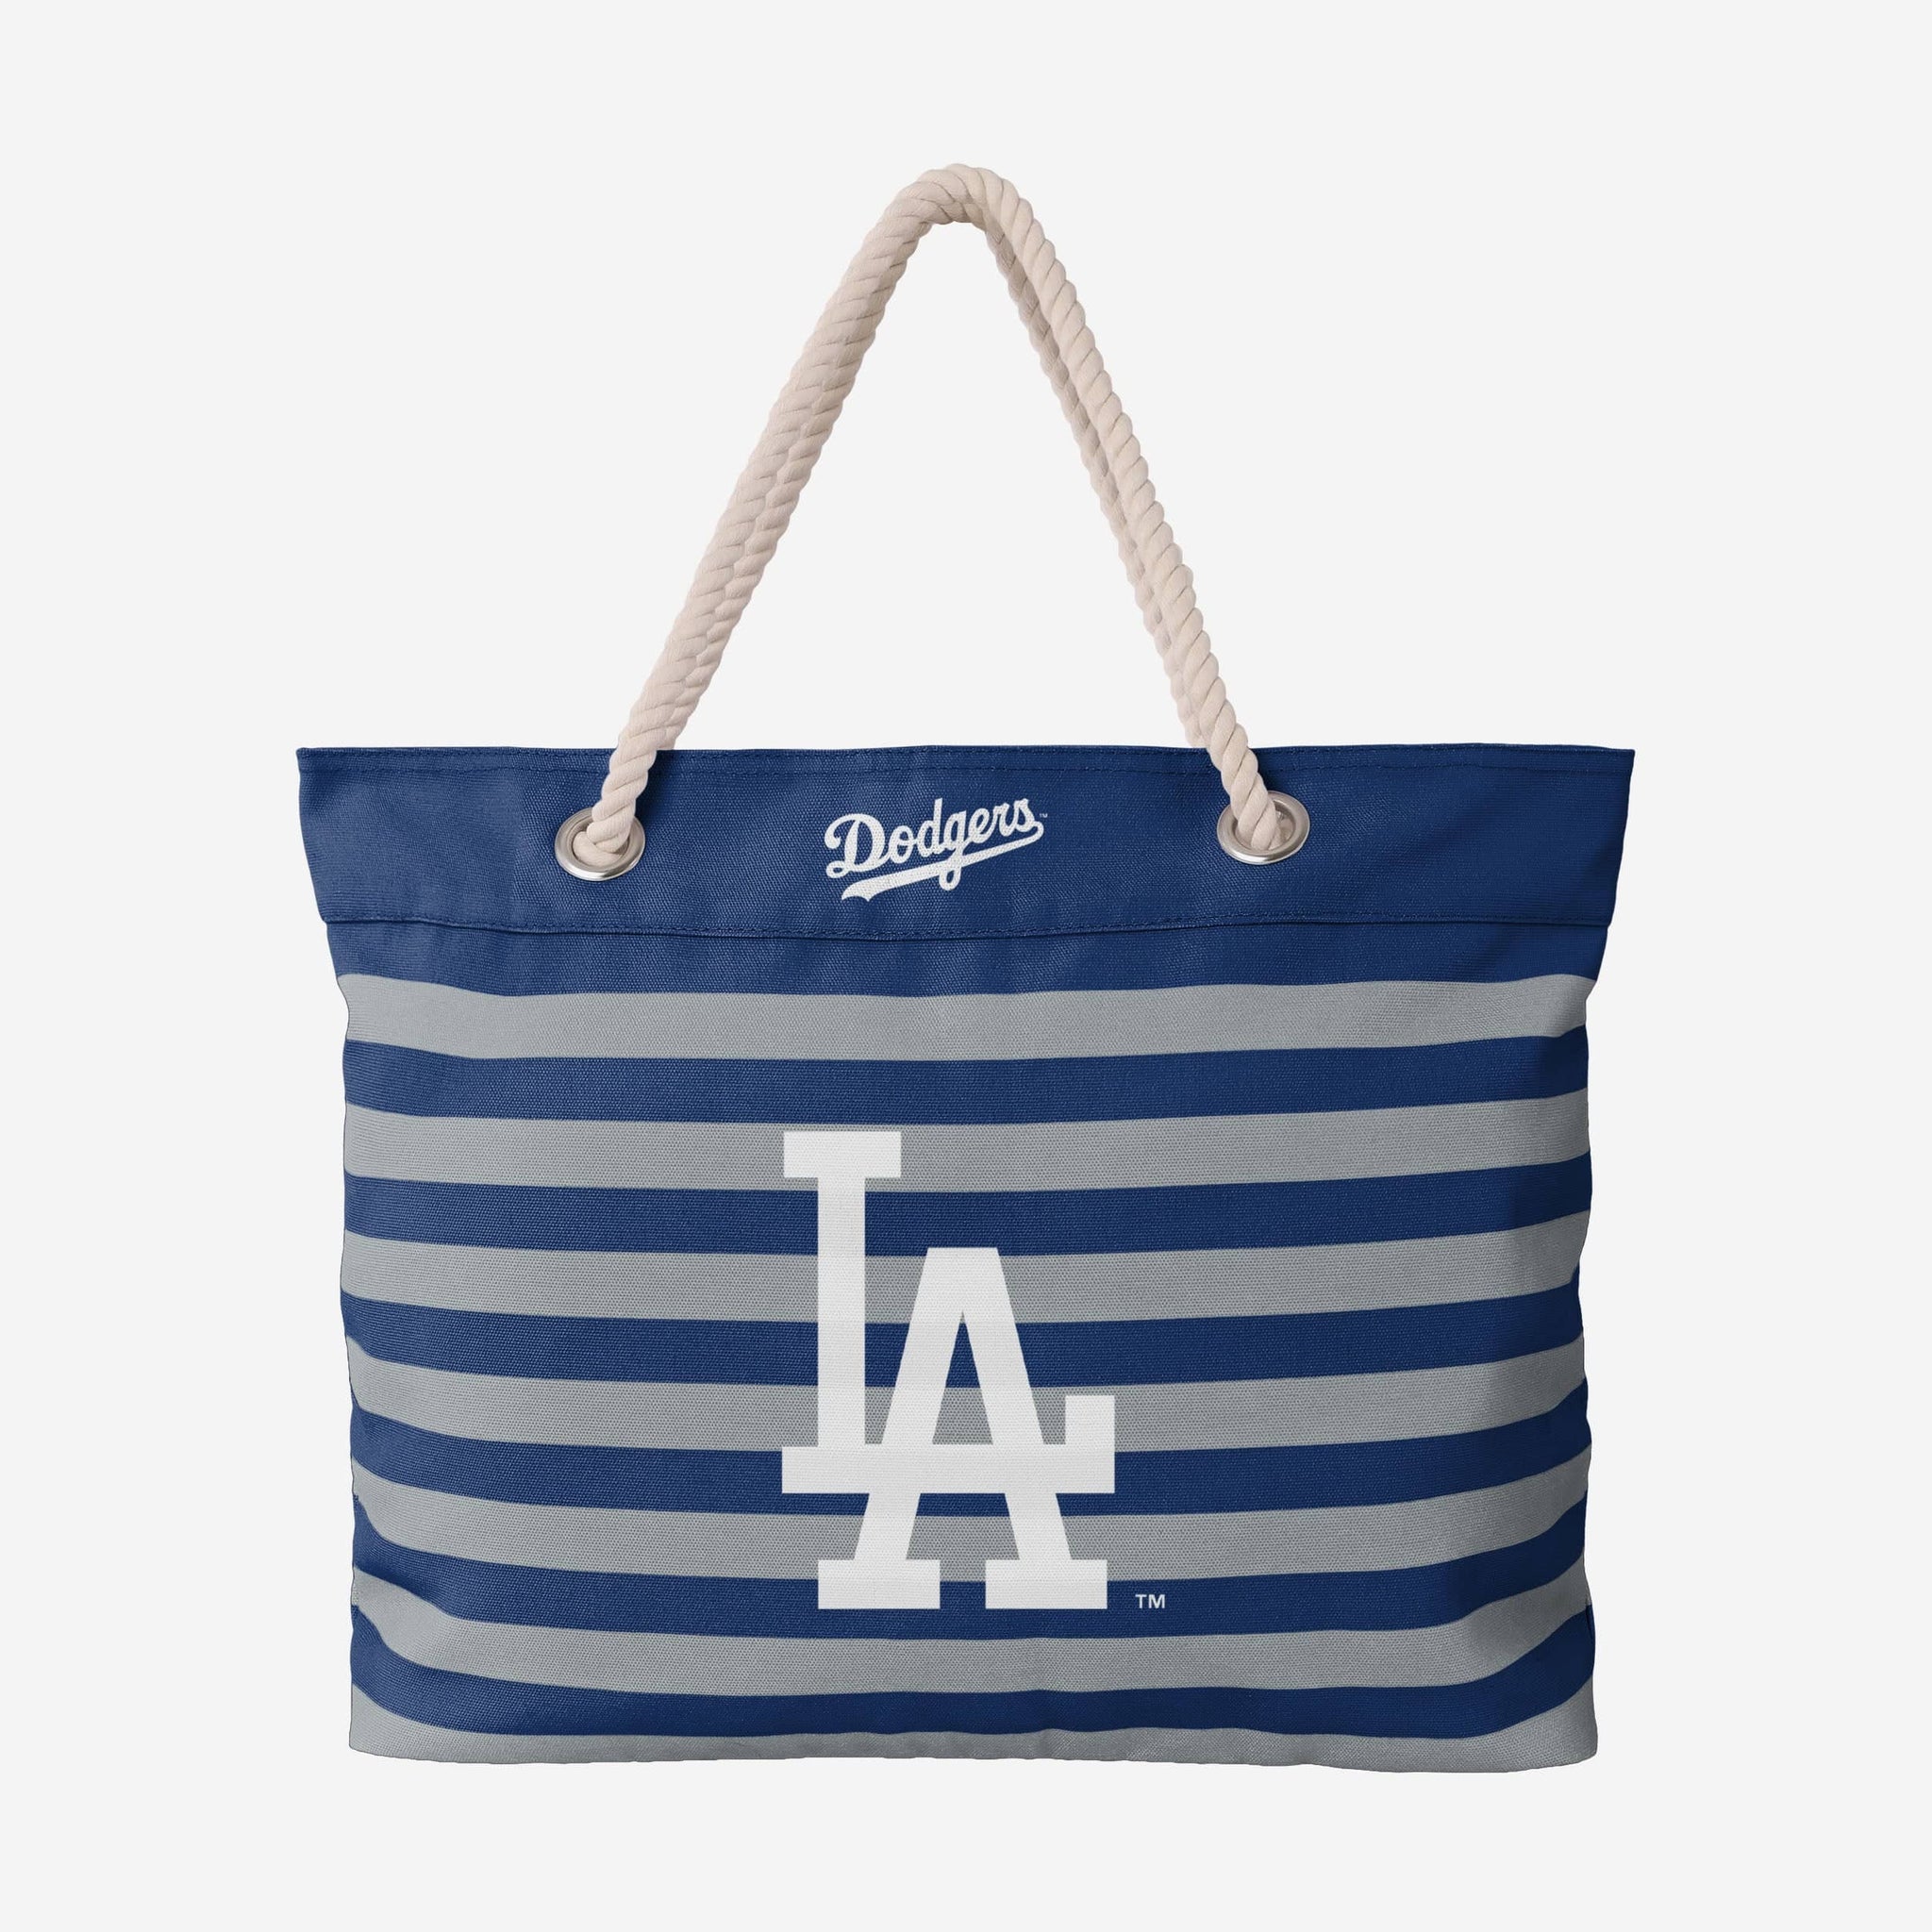 Los Angeles Dodgers Action Backpack FOCO